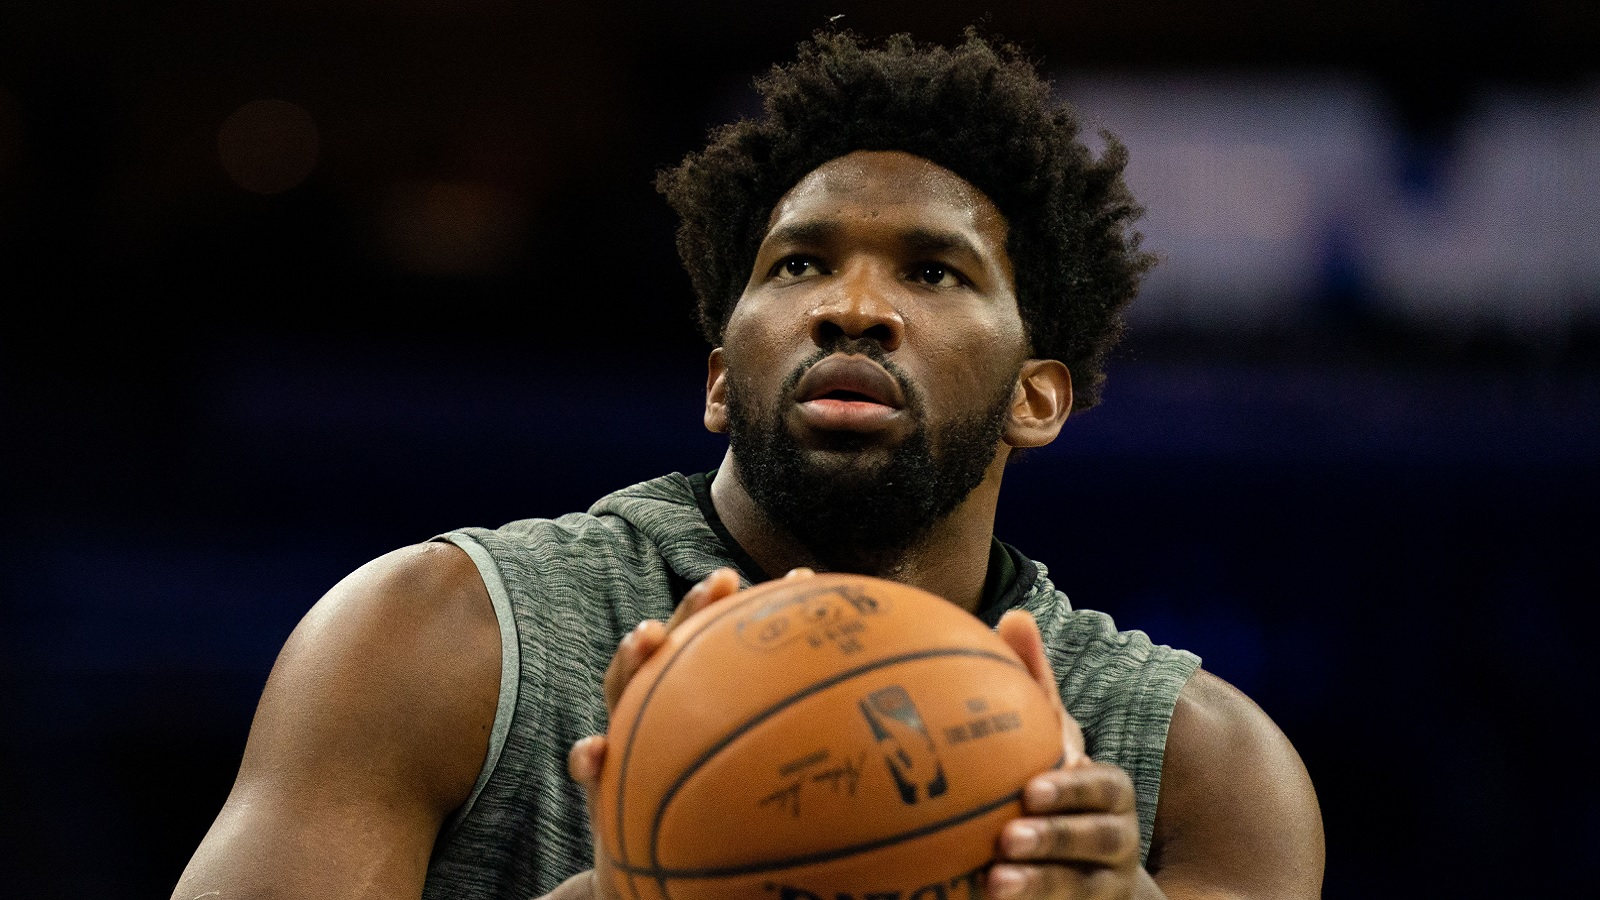 The Unstoppable Force Joel Embiid's Road to Recovery and Playoff Aspirations